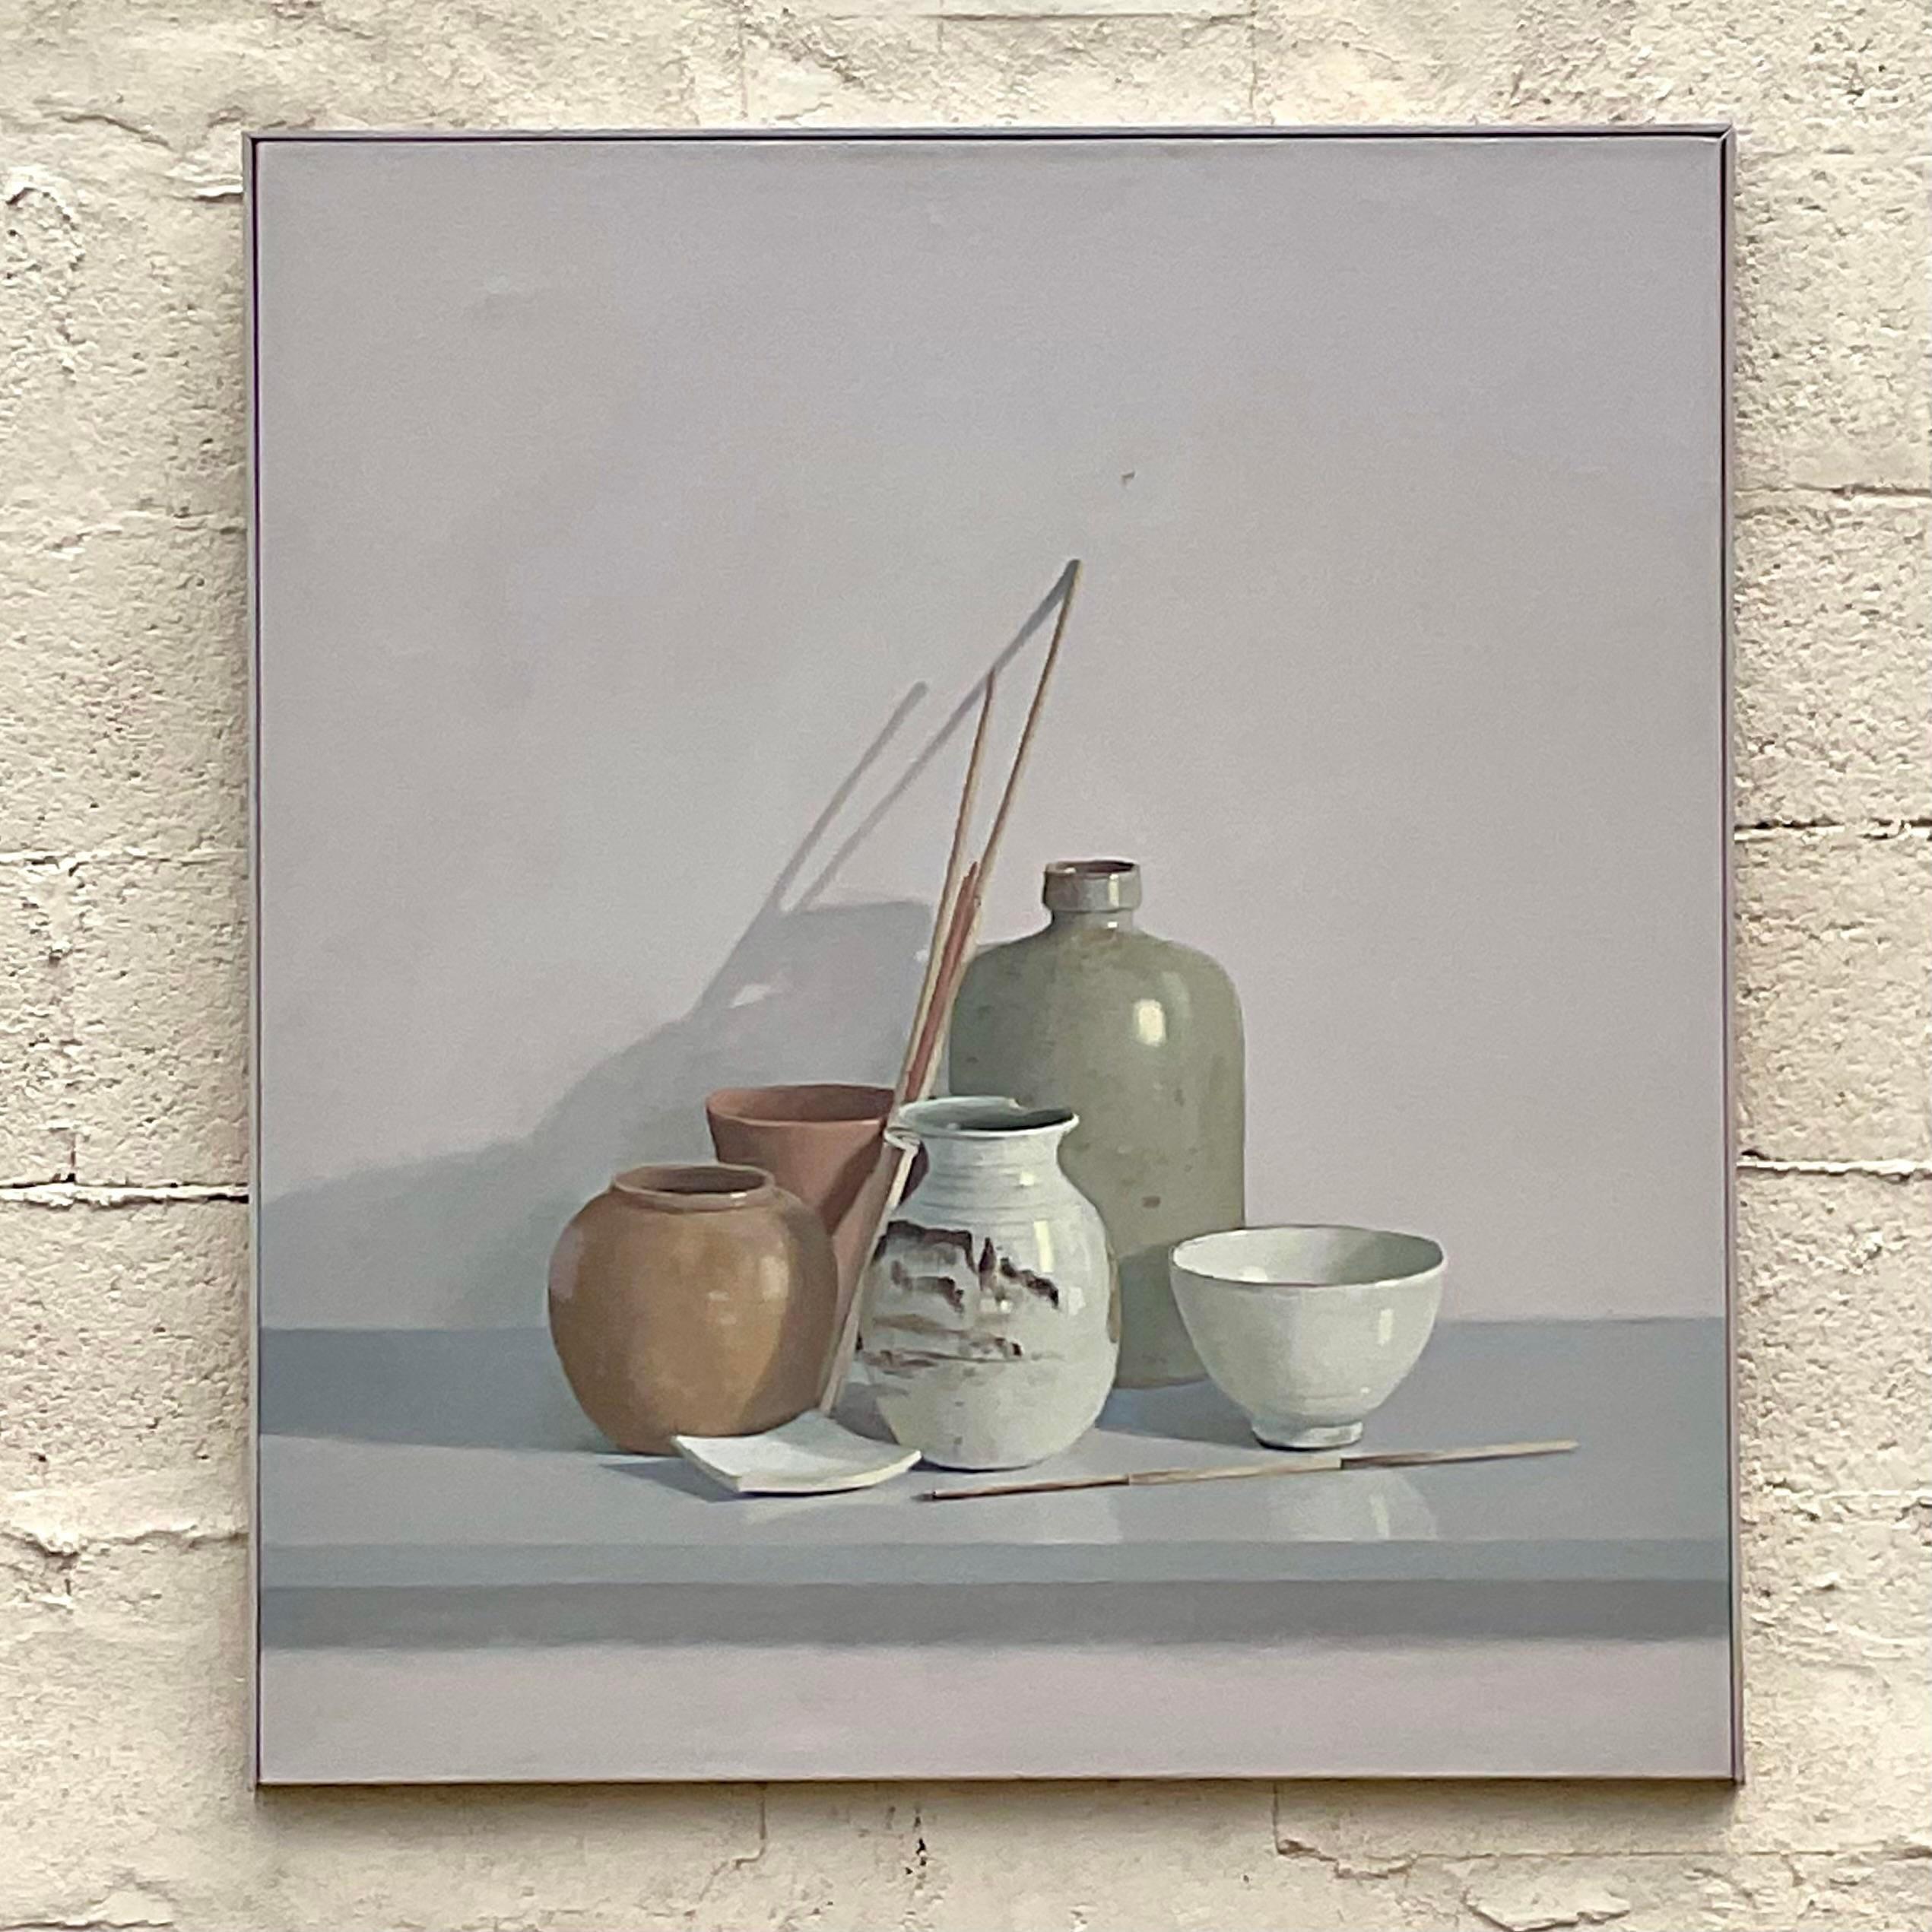 A striking vintage boho original oil painting on canvas. A chic still life in pale cool colors. Signed on the frame and dated by the artist 2000. Acquired from a Palm Beach estate.